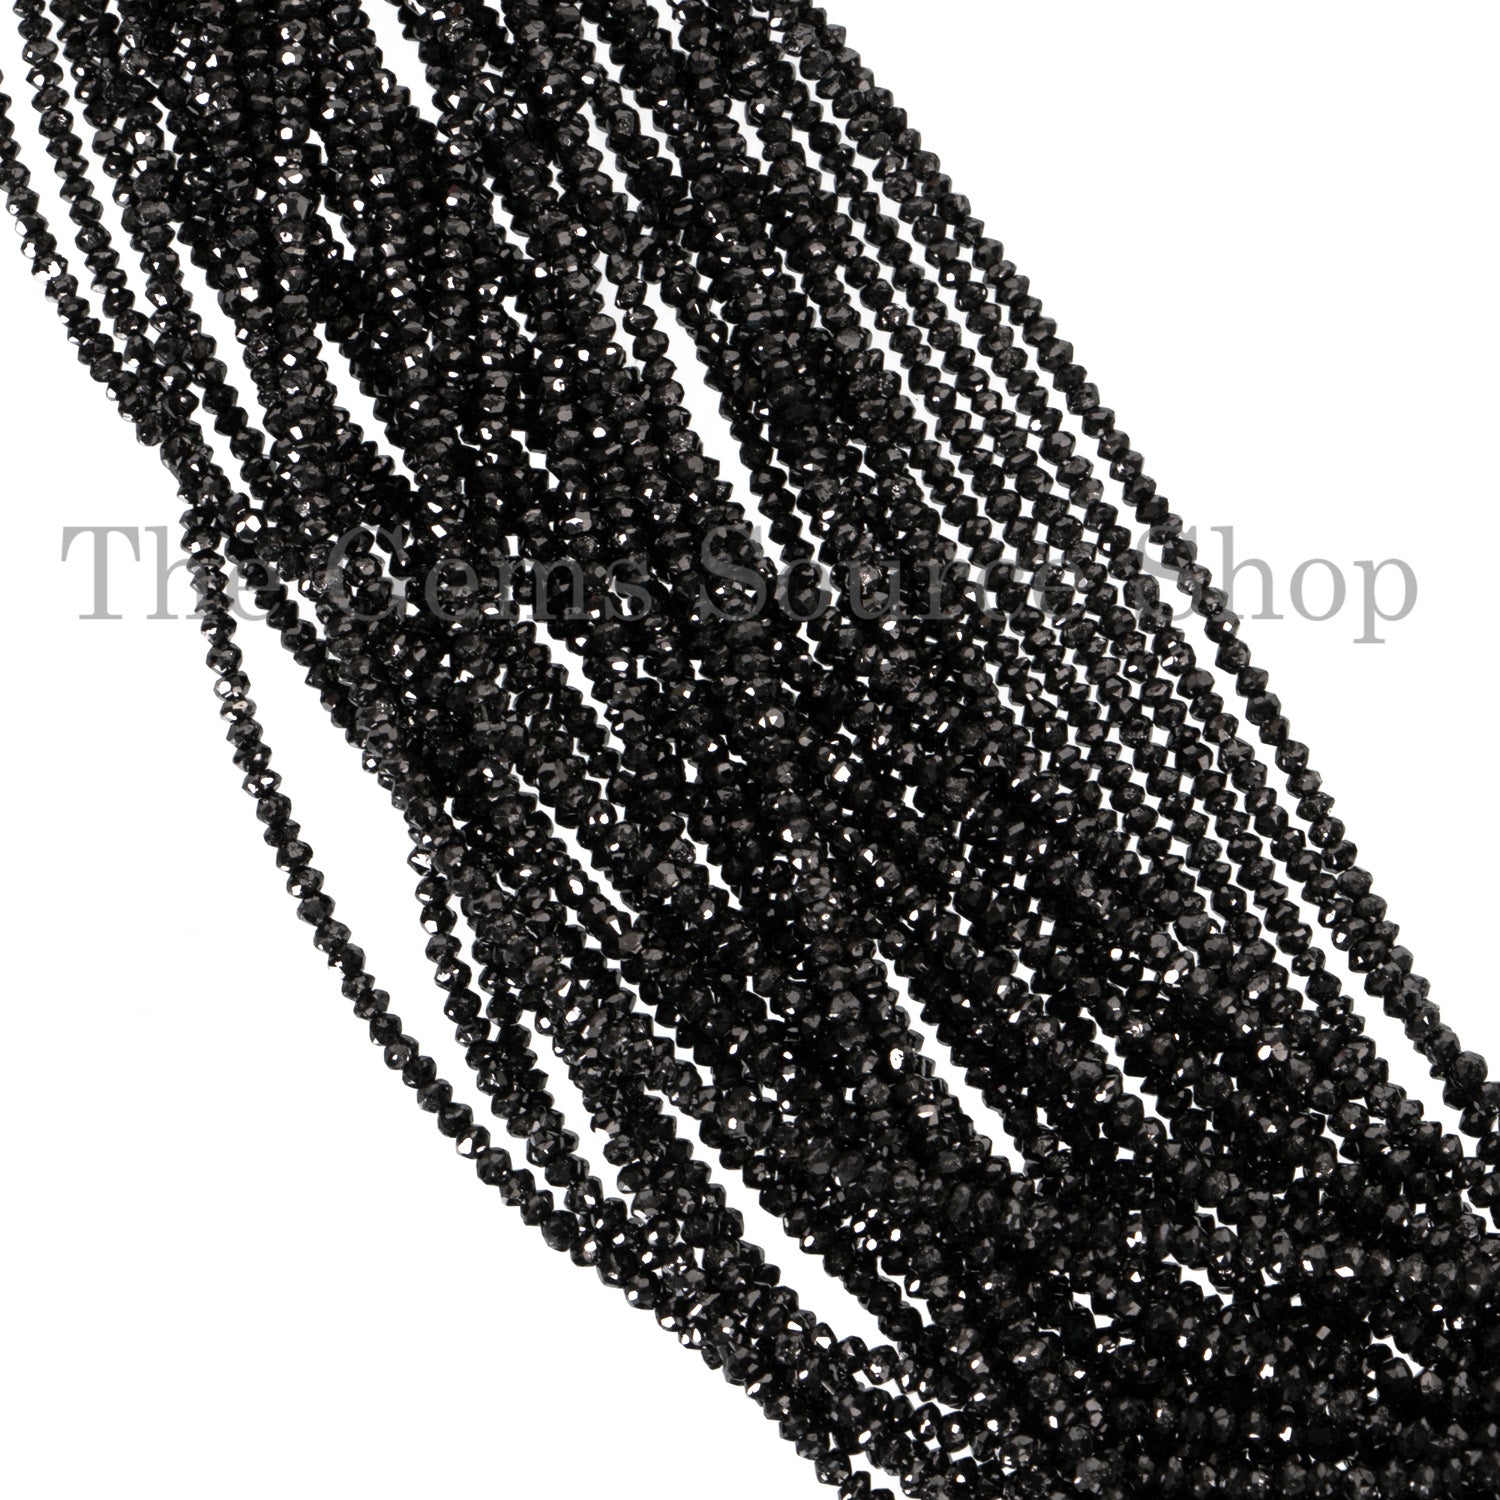 Top Quality Black Diamond Faceted Rondelle Beads, Black Diamond Beads, Rondelle Beads, Gemstone Rondelle